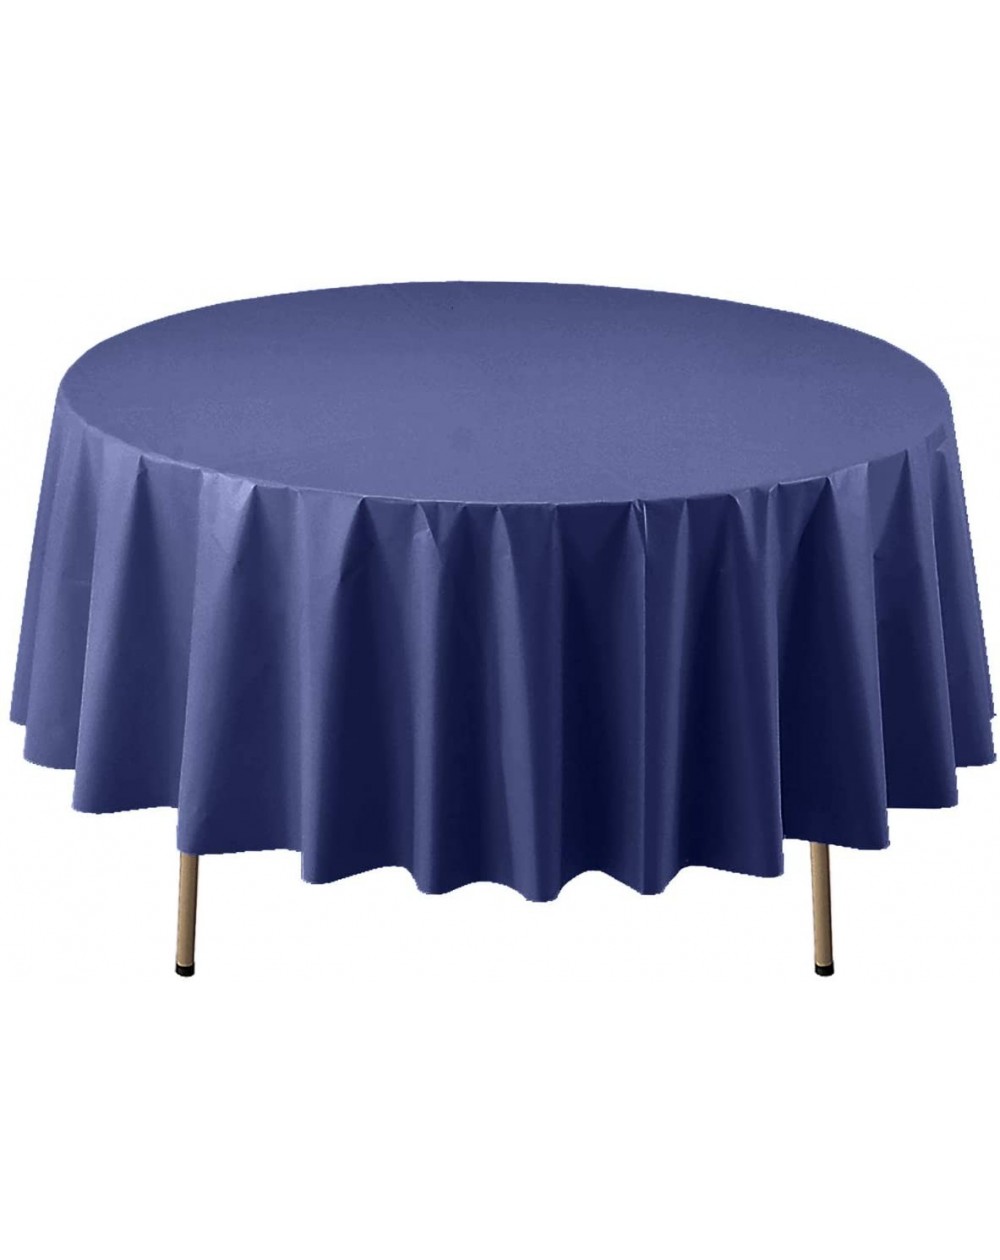 Tablecovers Heavy Duty 84" Round Plastic Table Cover Available in 22 Colors- Navy Blue - Navy Blue - C211015PUFV $8.07